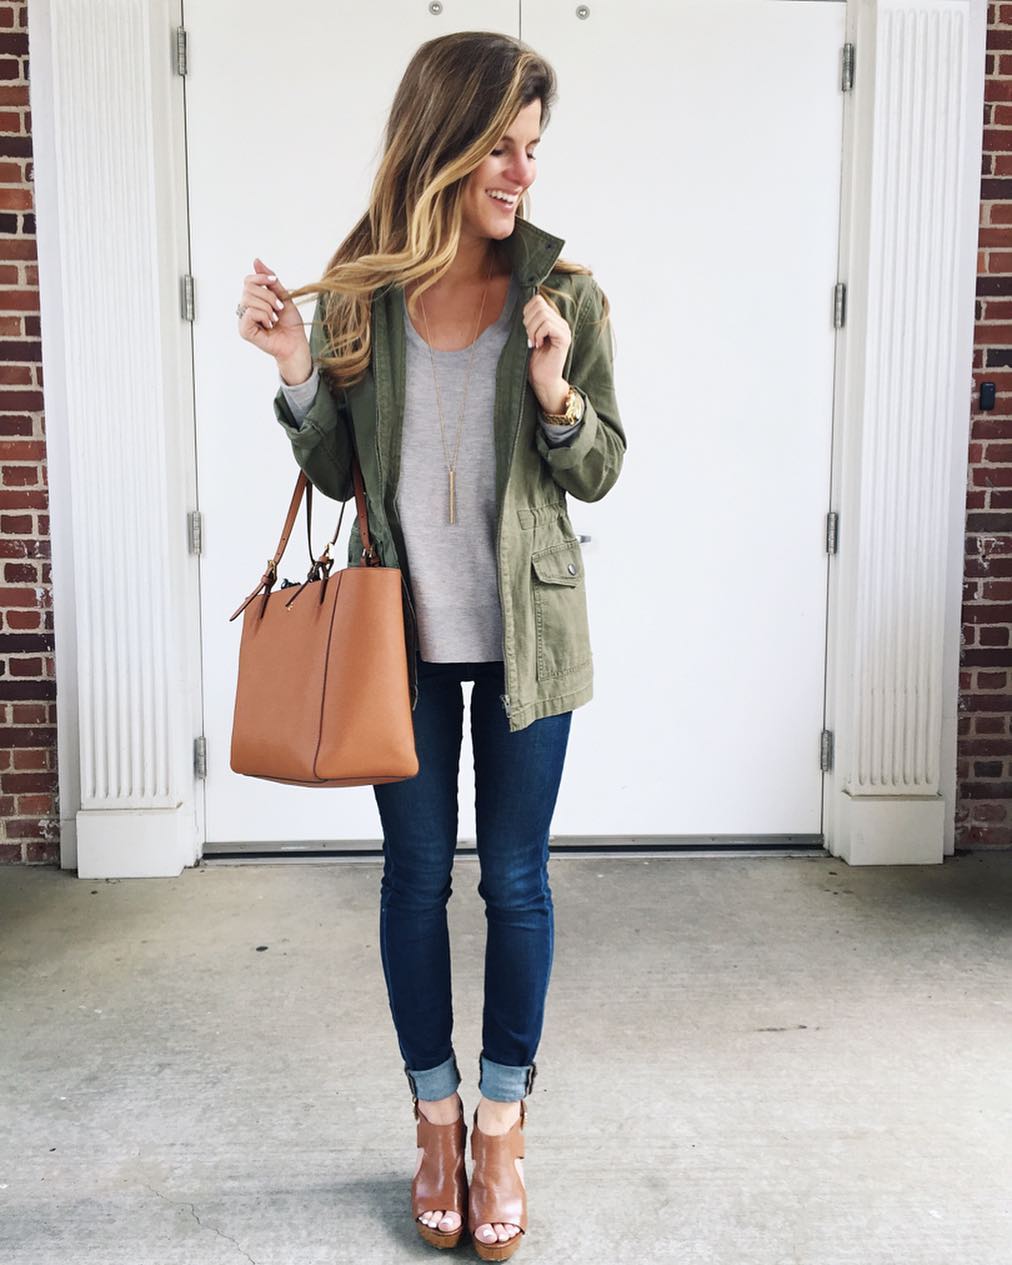 fall outfit, utility jacket, cognac wedges, rolled up jeans, tory burch york tote, long gold pendant necklace, april outfit, september outfit